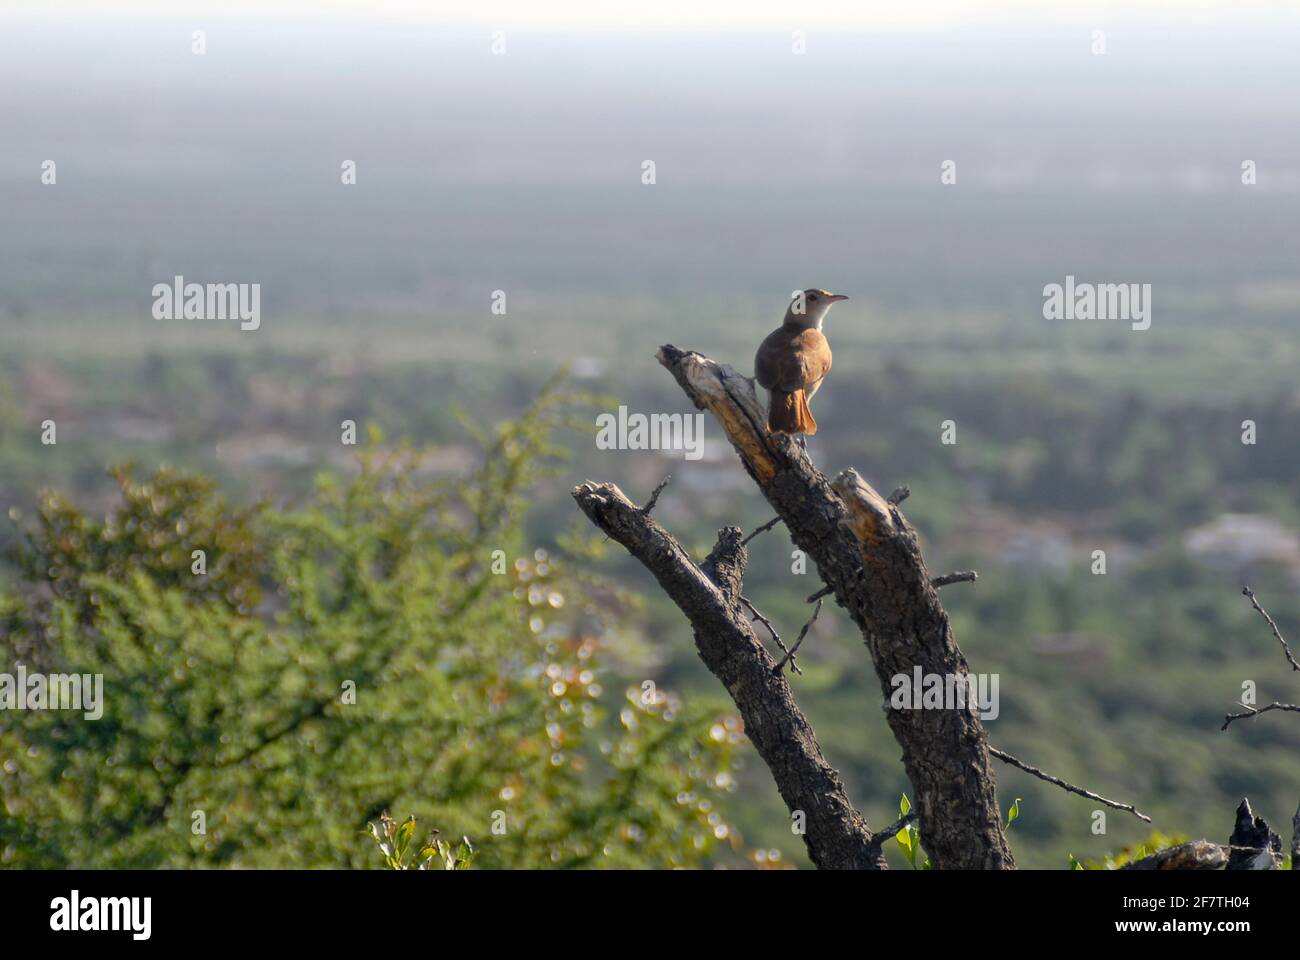 A bird resting on a tree over the Merlo valley, San Luis, Argentina Stock Photo